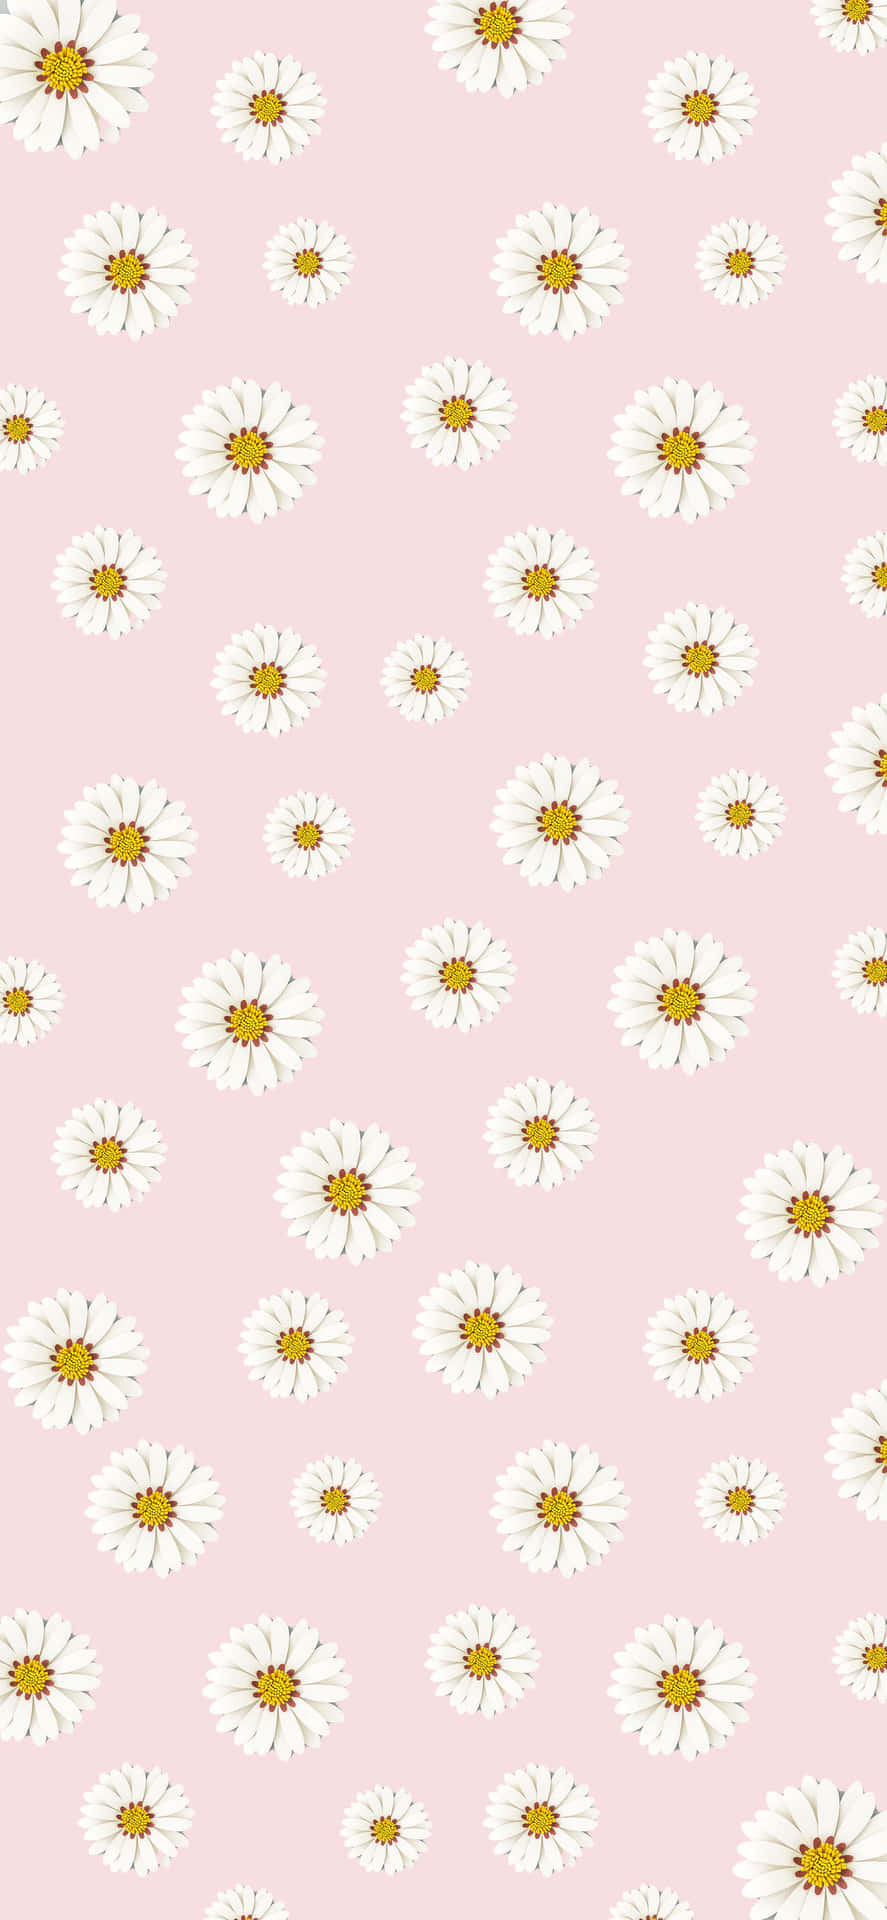 Welcome Spring with vibrant colored daisies! Wallpaper